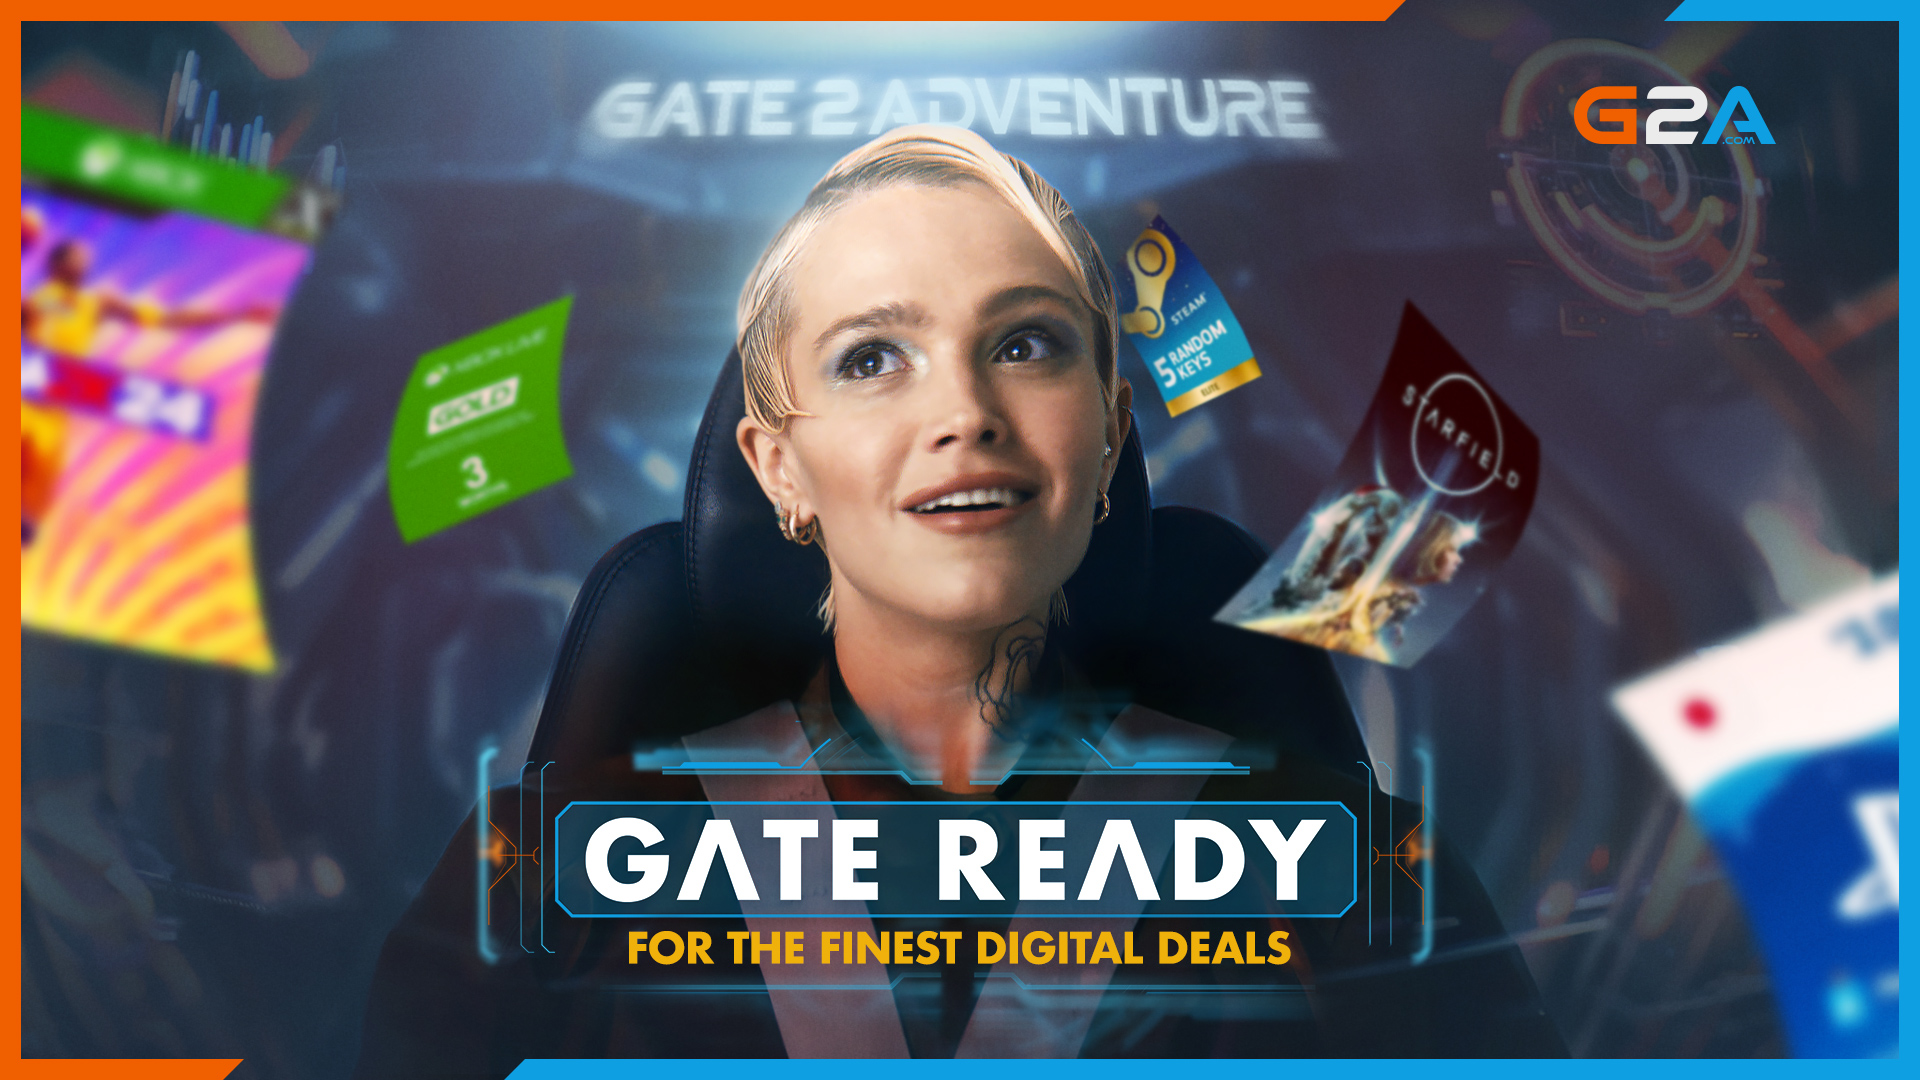 G2A.COM Celebrates 13th Birthday by Introducing New Communication Platform to the U.S. Market